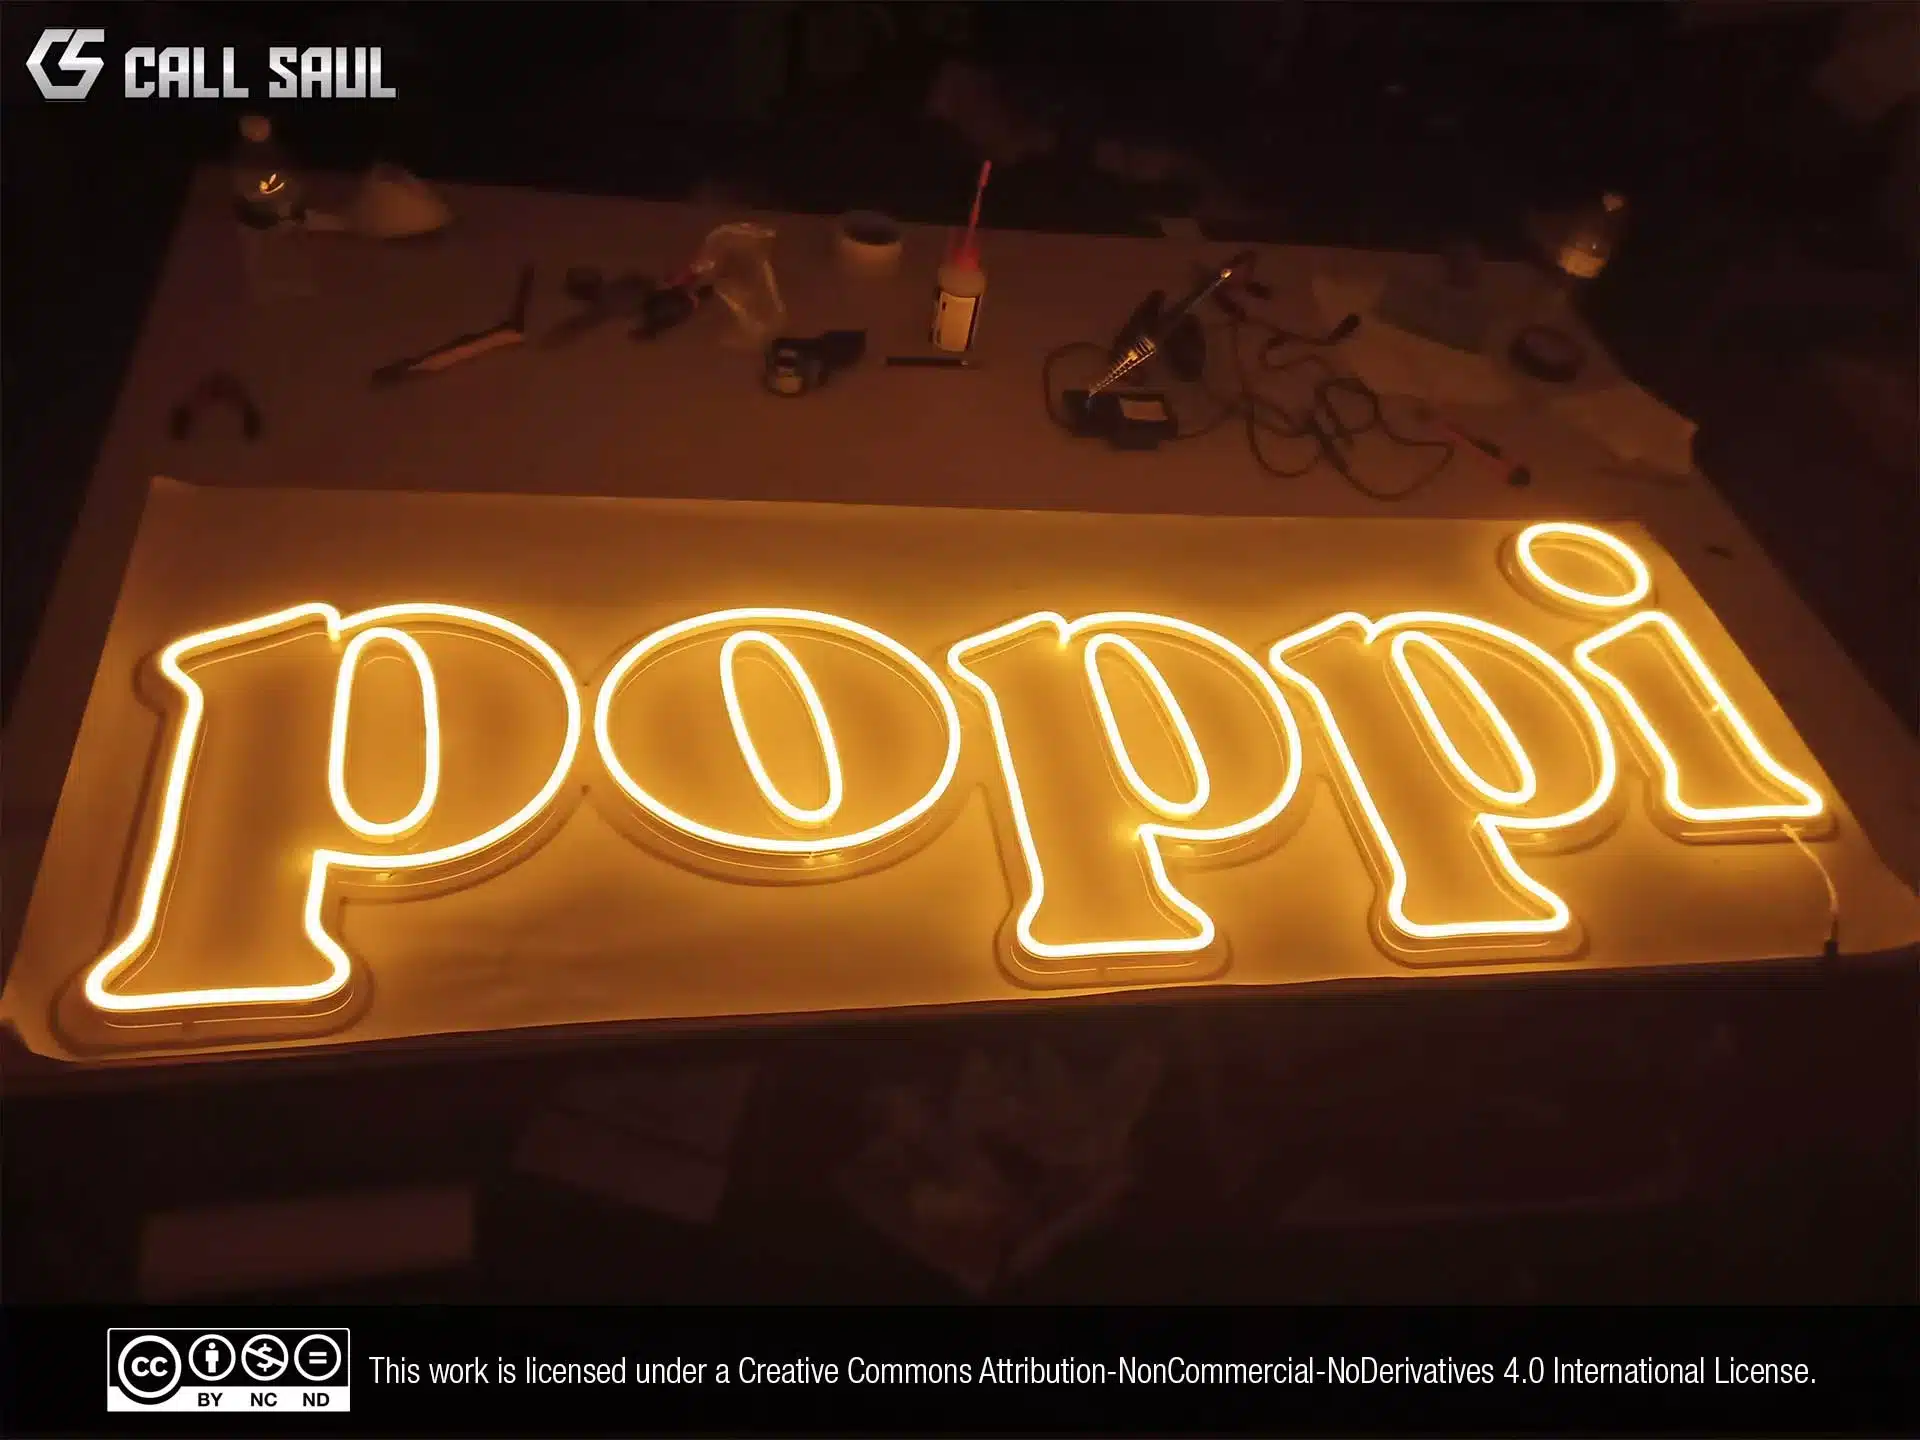 Poppi Yellow Color LED Neon Sign